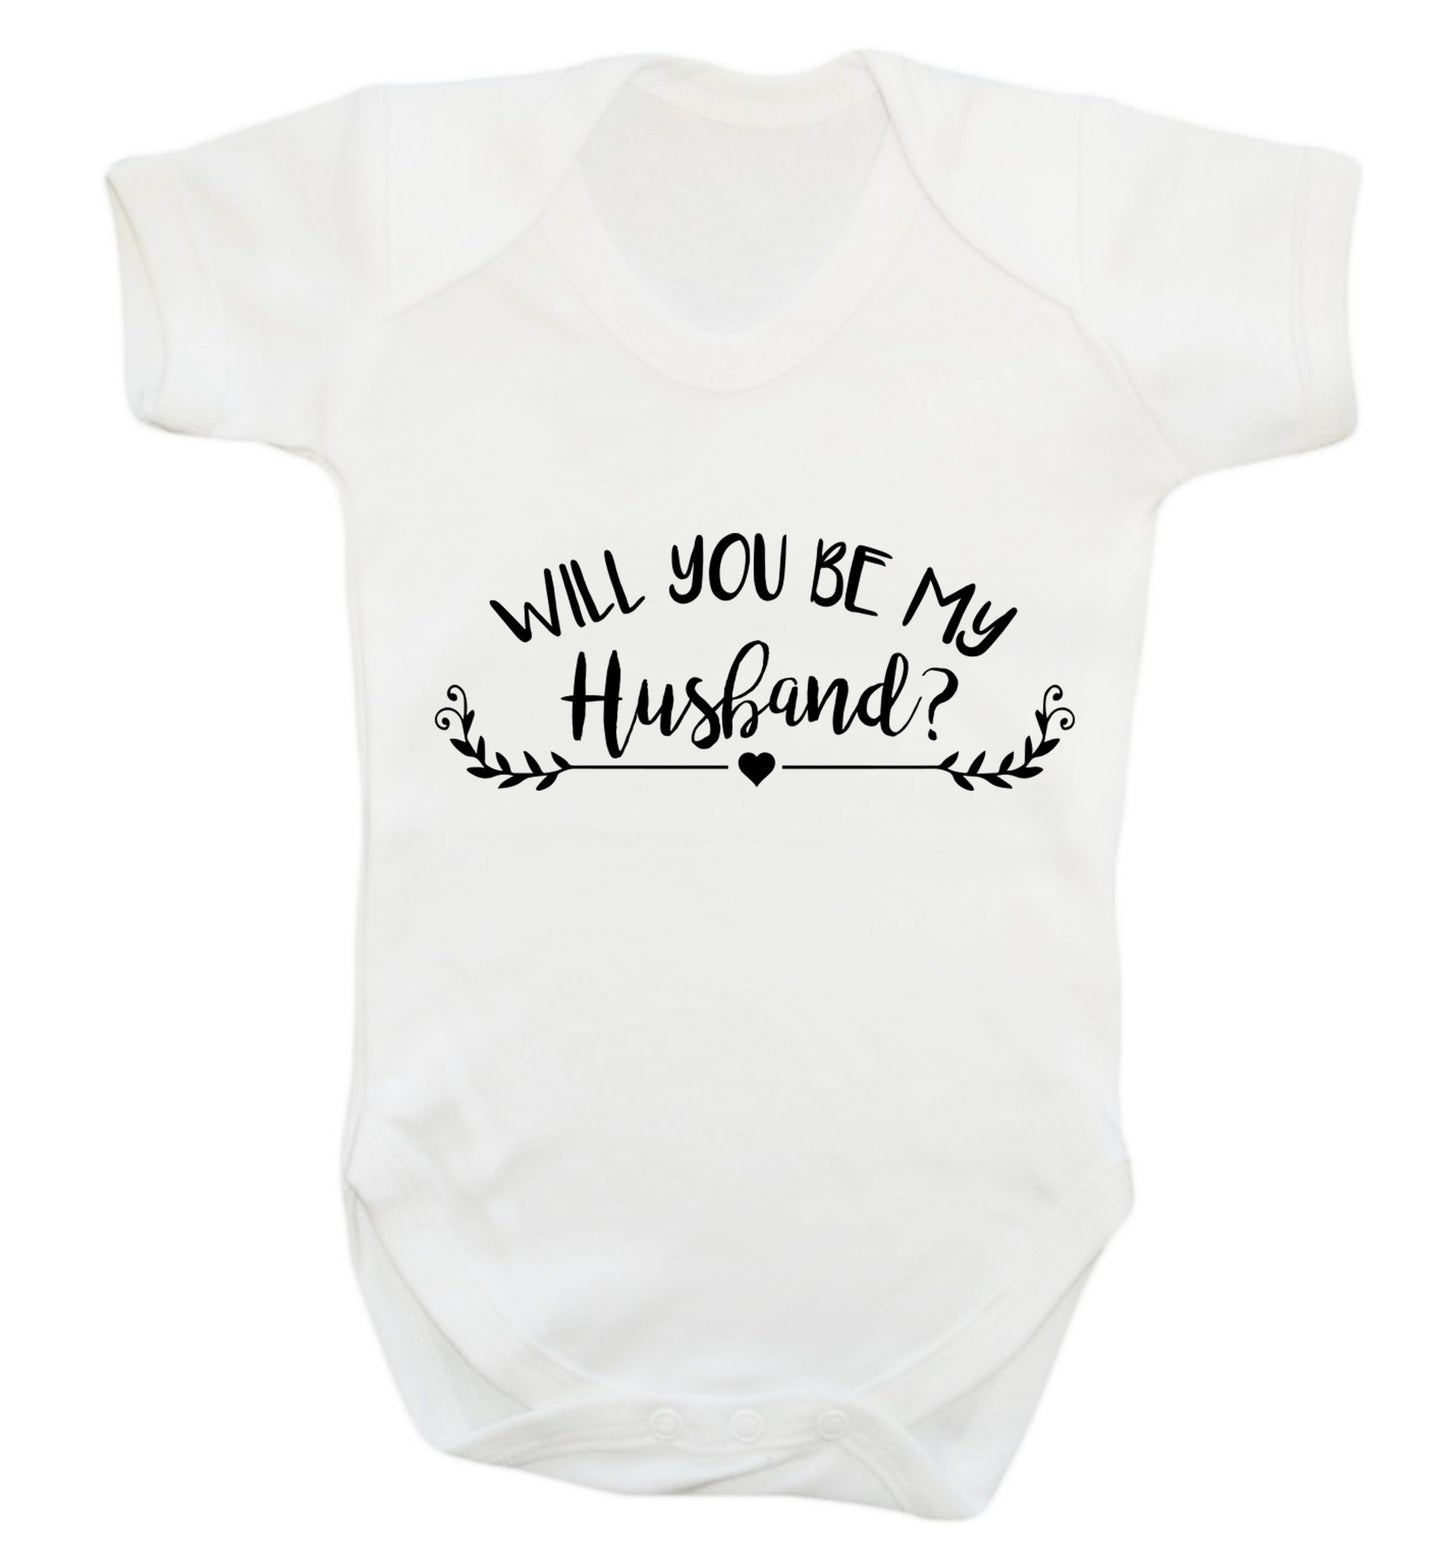 Will you be my husband? Baby Vest white 18-24 months